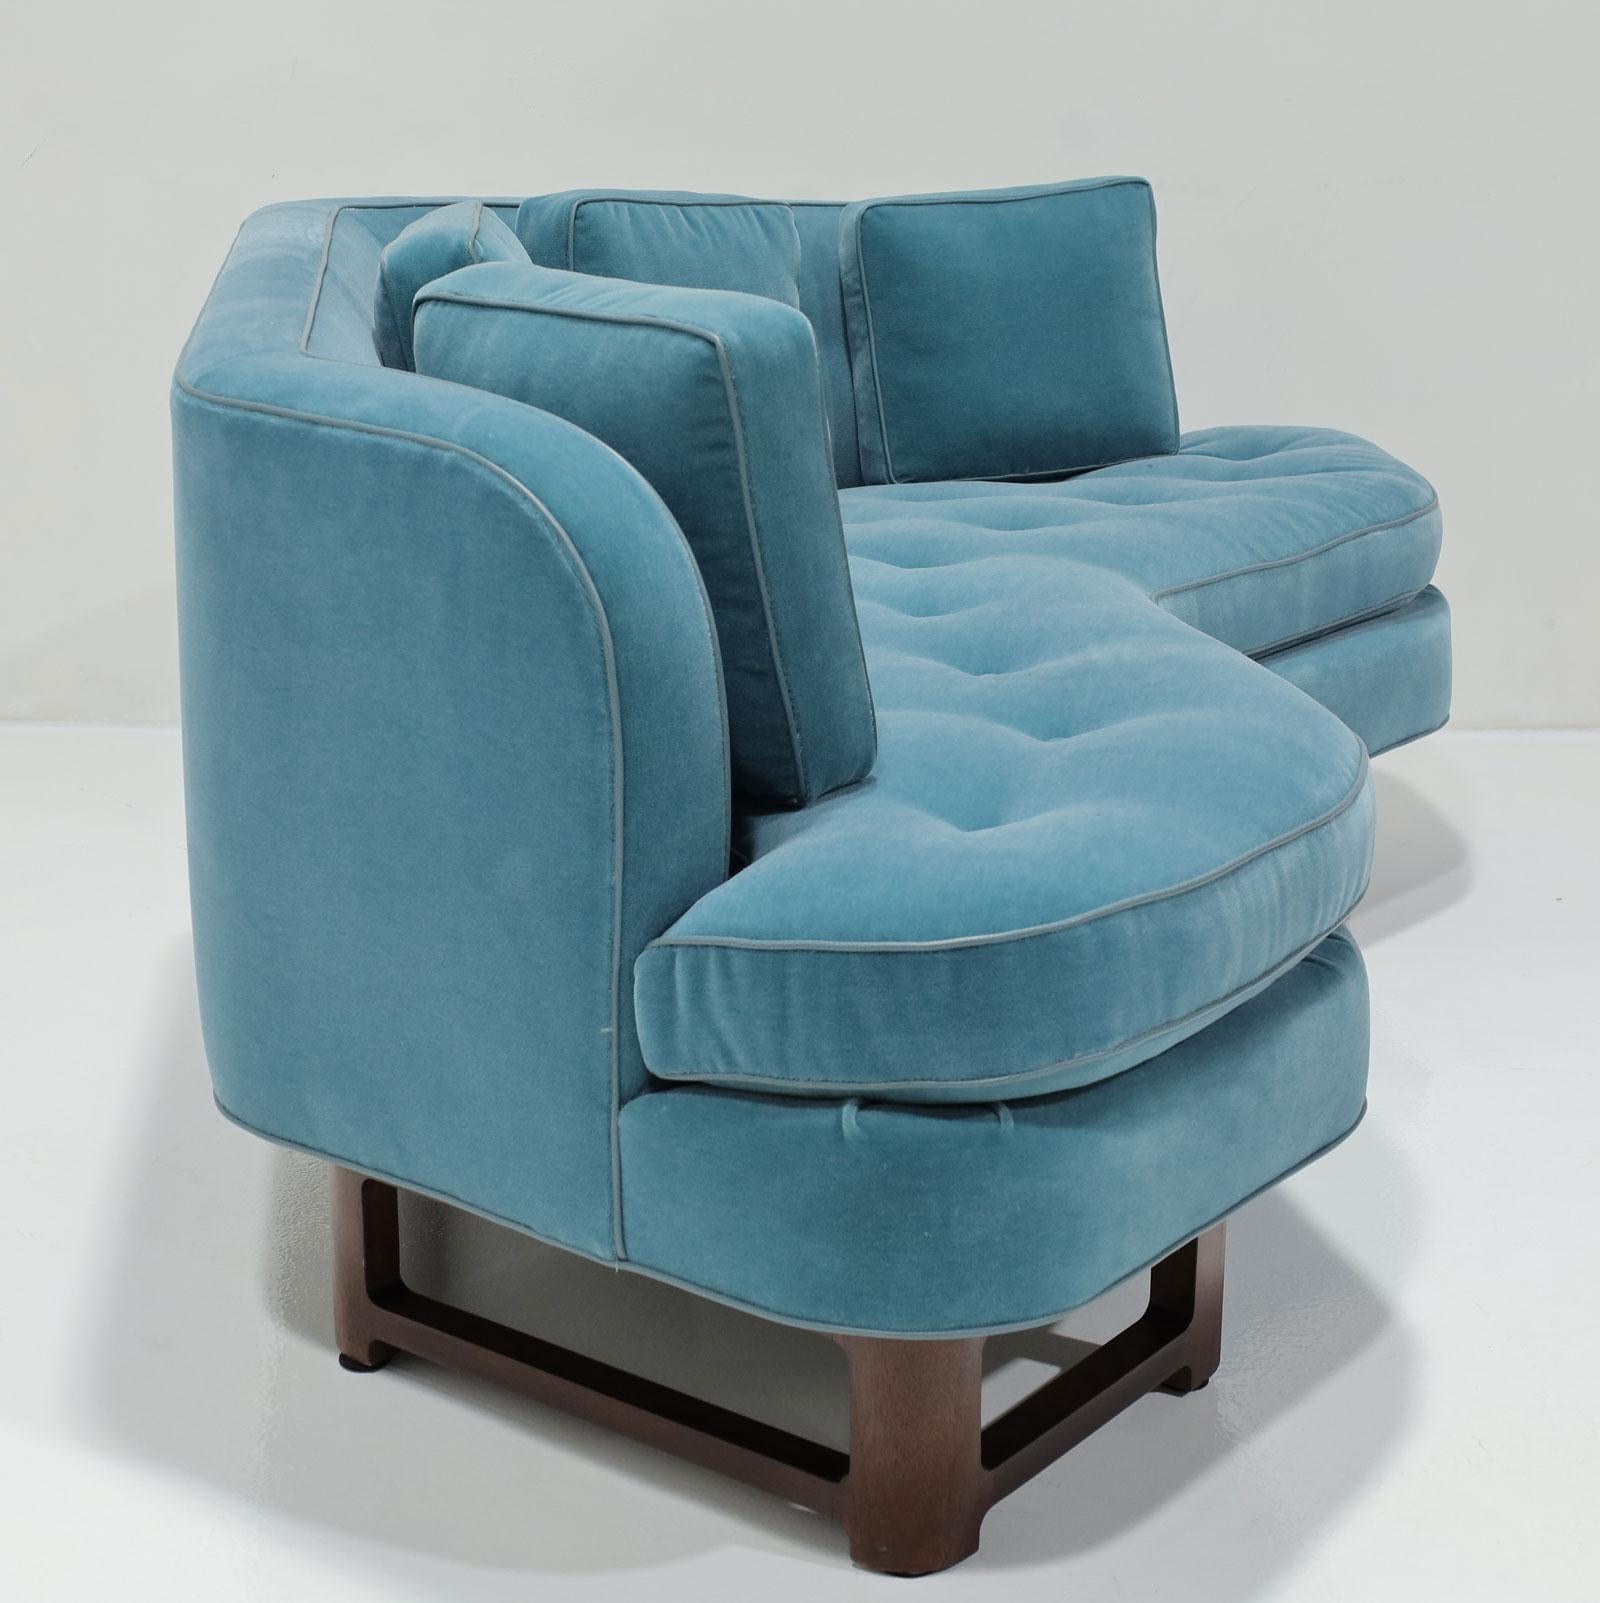 20th Century Edward Wormley for Dunbar Janus Collection Angle Sofa in Blue Mohair For Sale